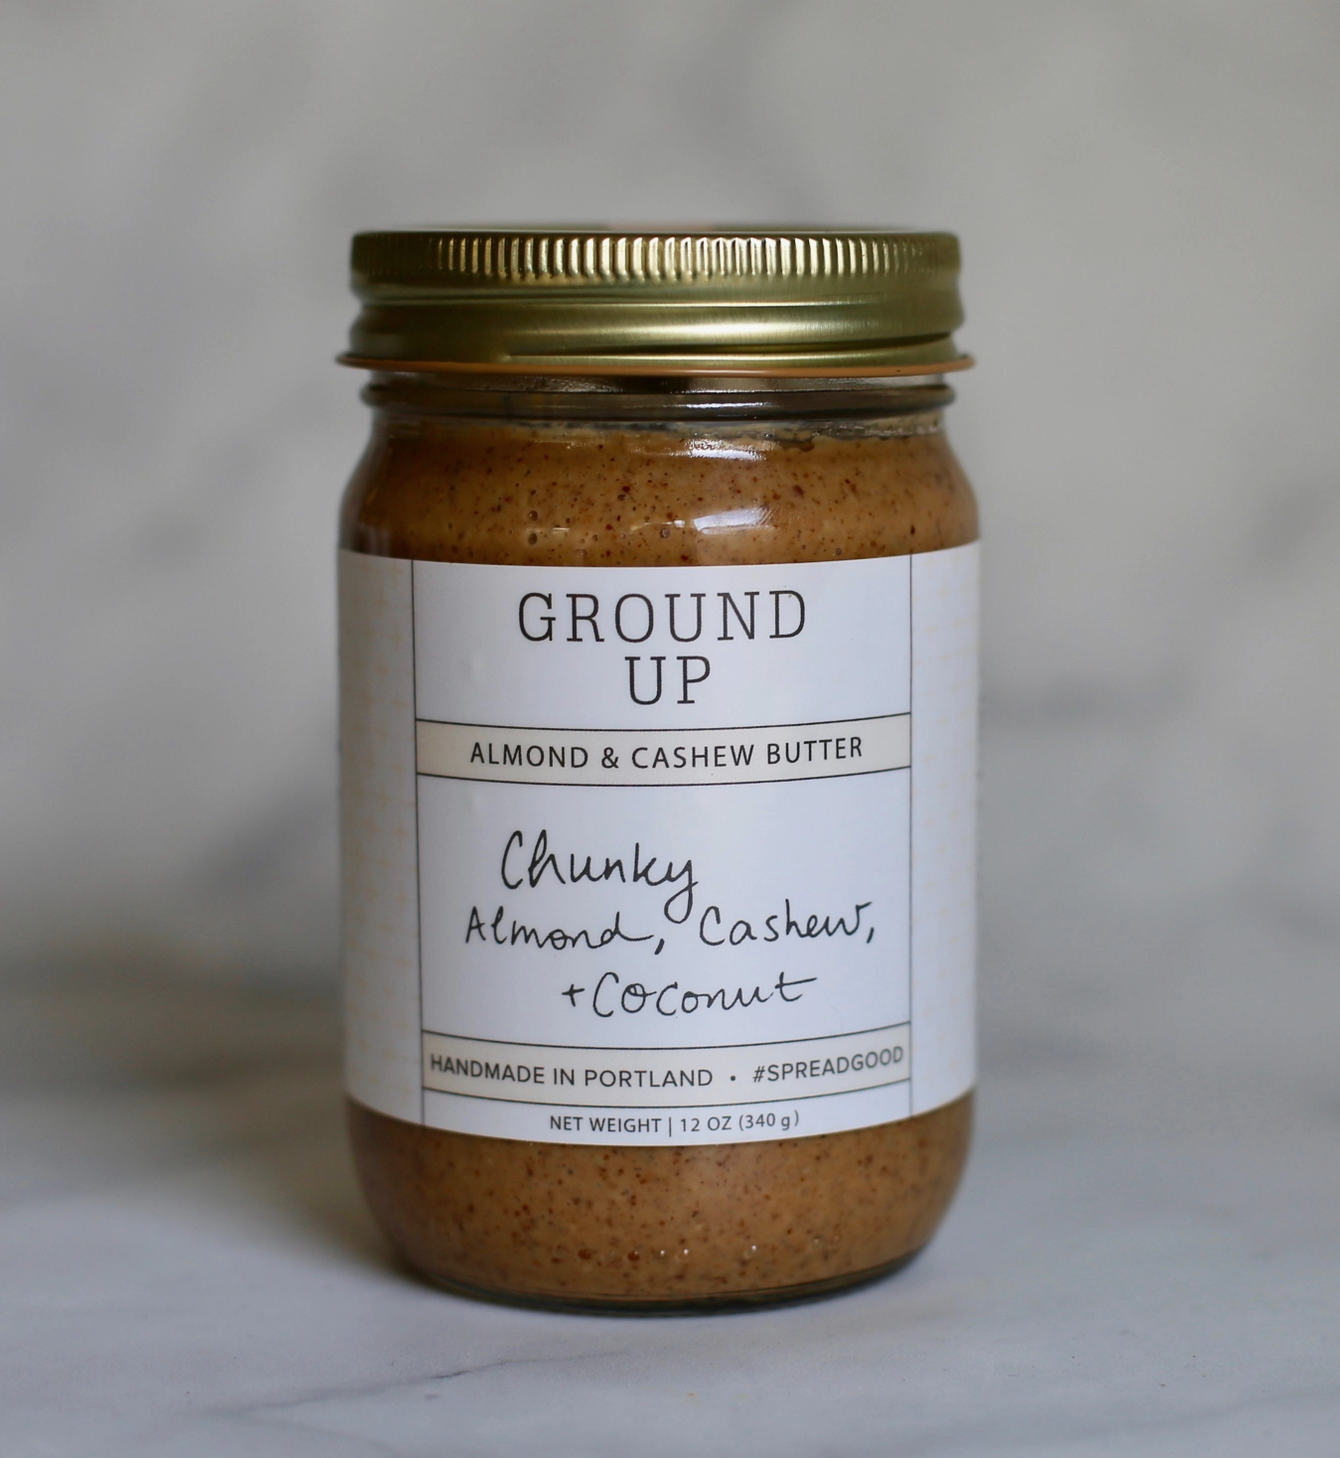 Ground Up Chunky Almond, Cashew + Coconut Butter